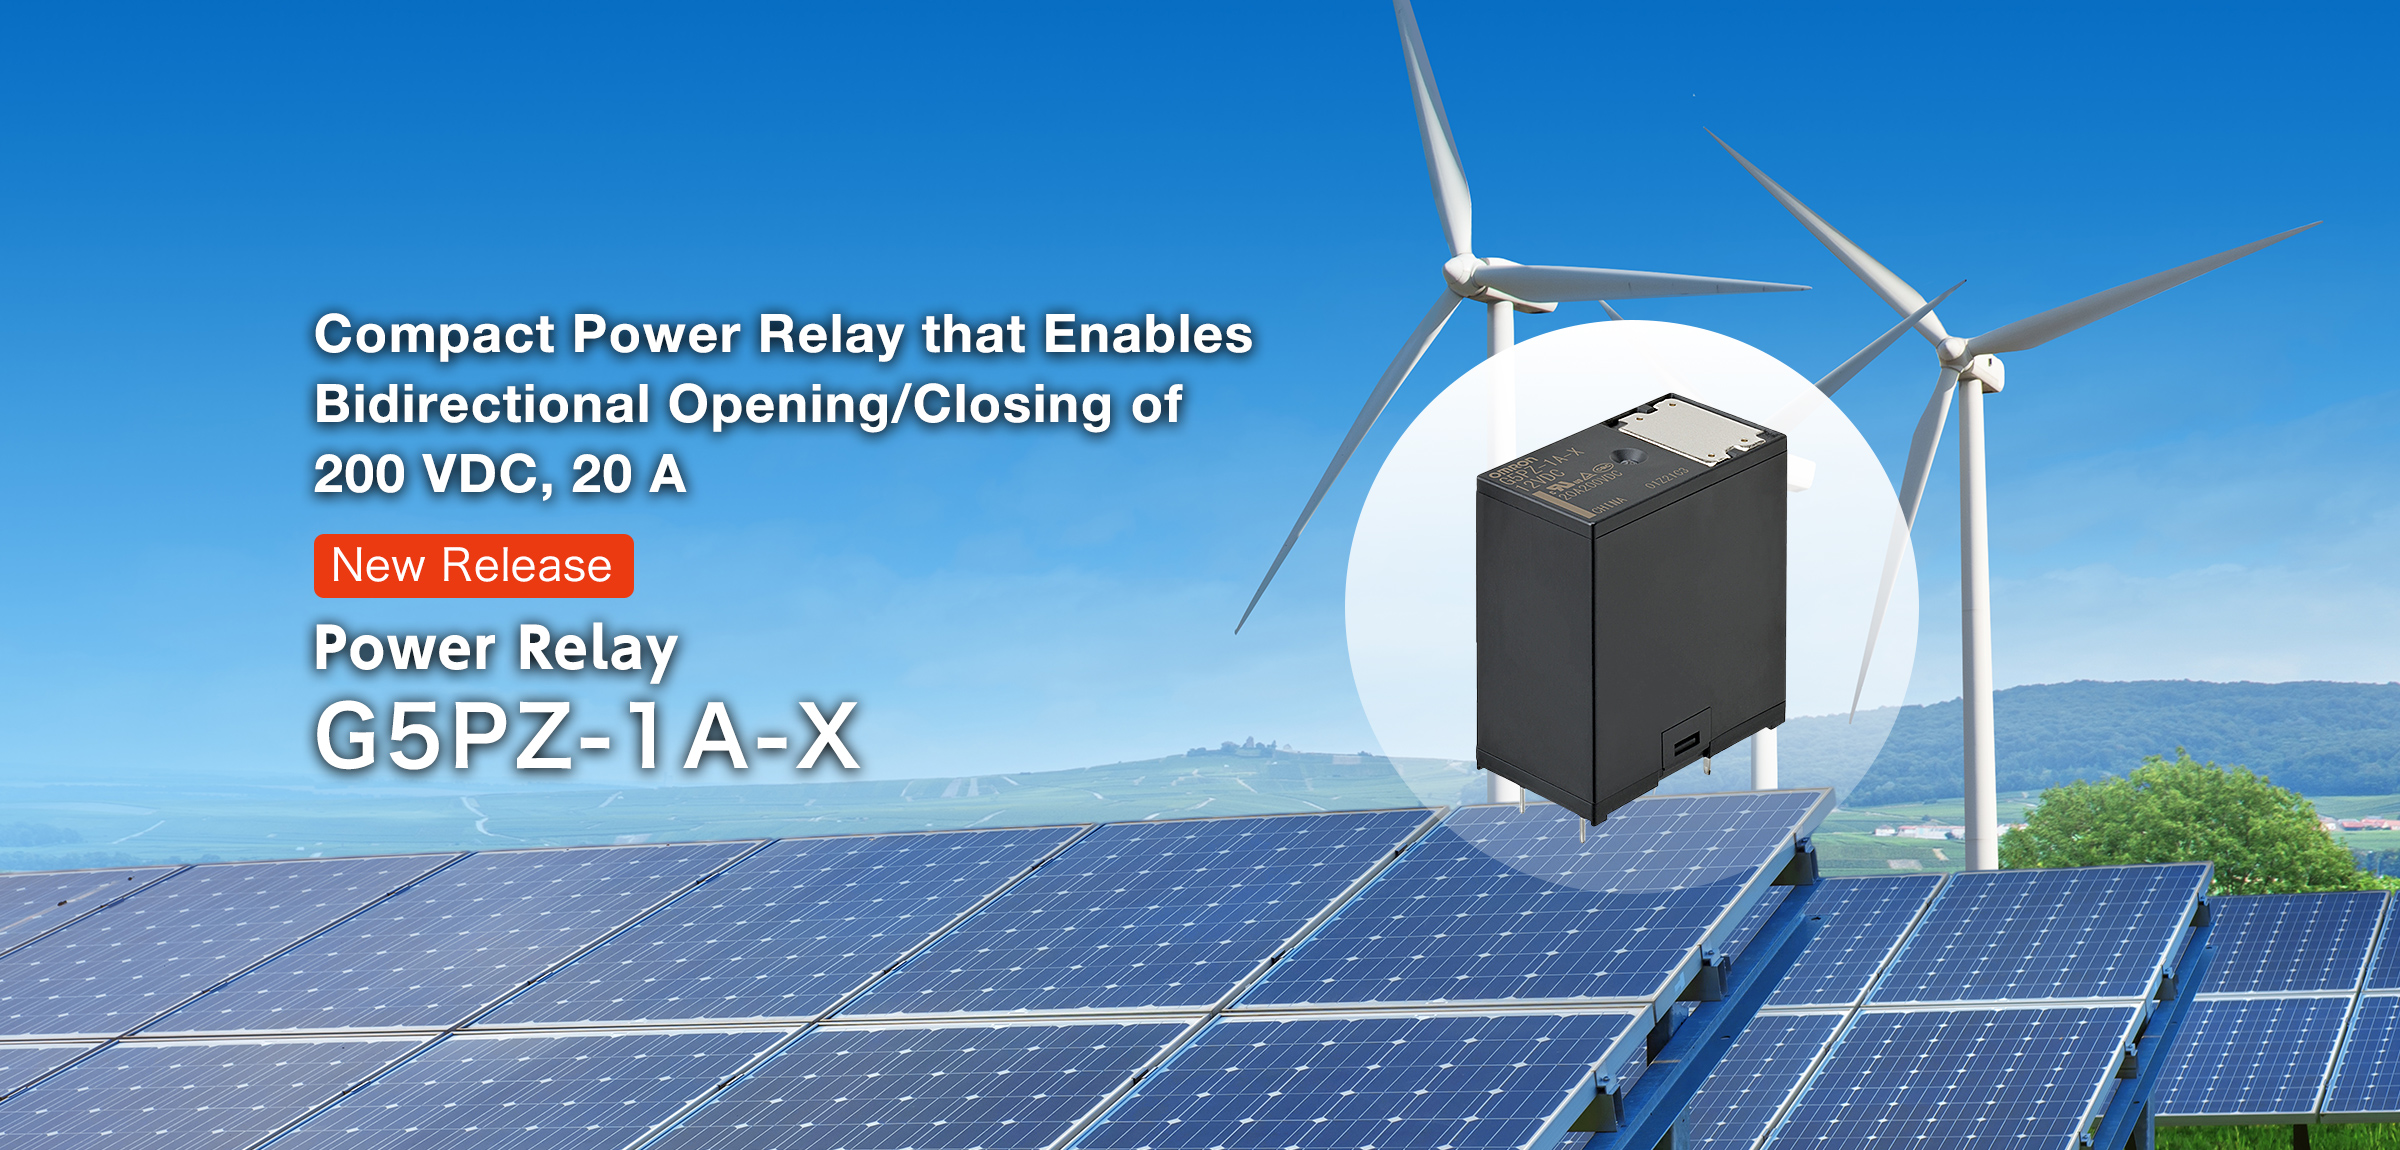 Compact Power Relay that Enables Bidirectional Opening / Closing of 200 VDC, 20 A